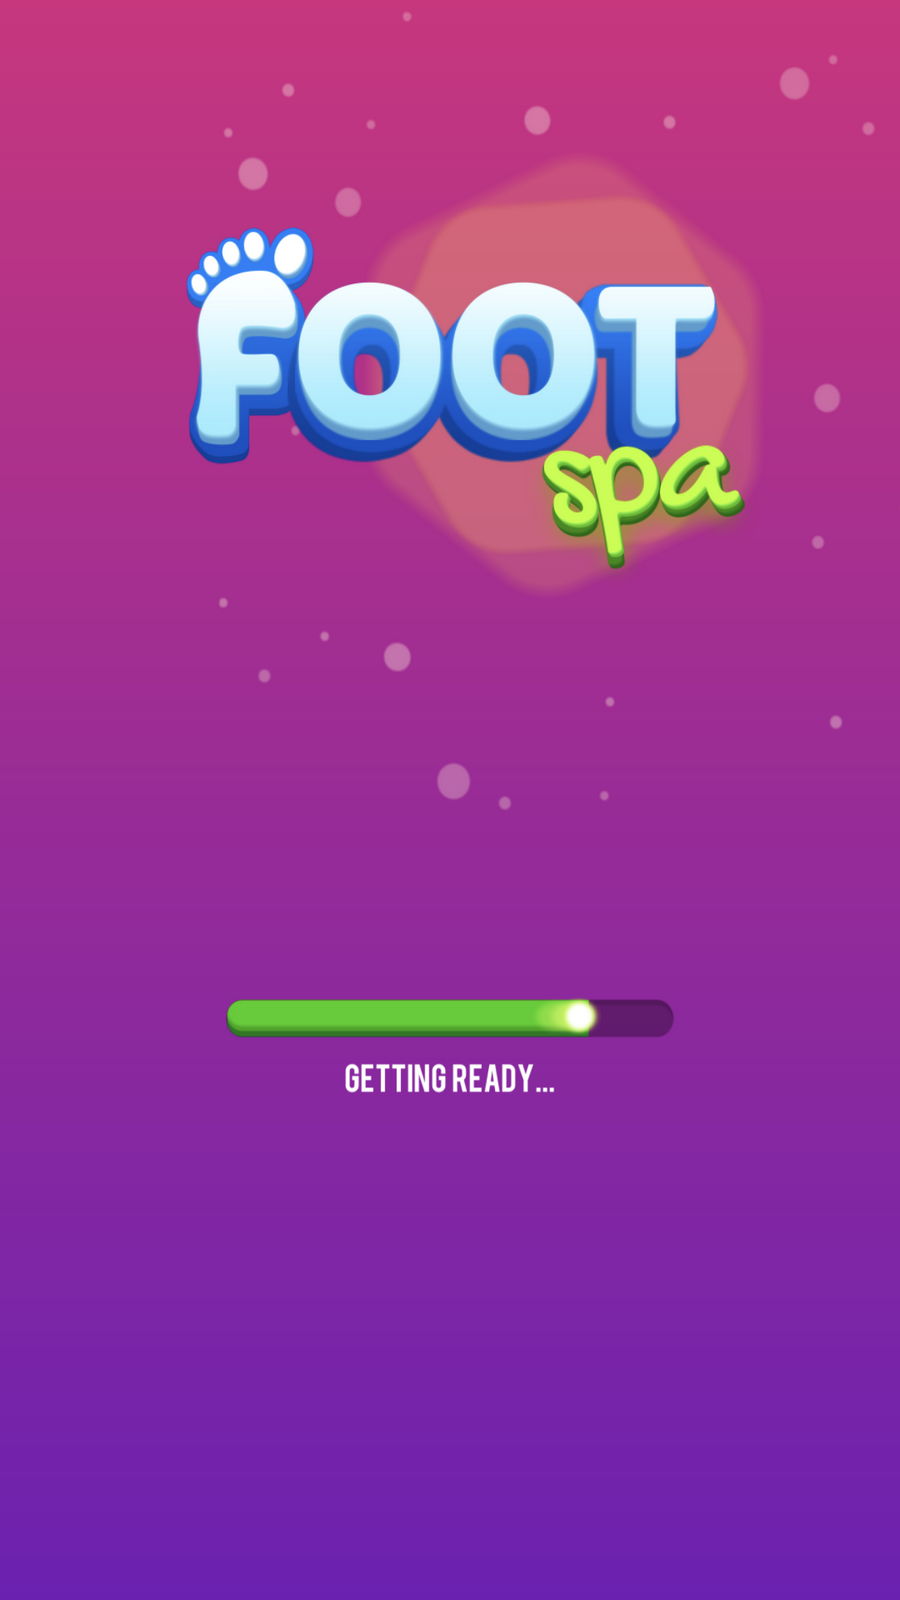 foot-spa-android-game-apk-com-thunderzone-pedicure-by-lion-studios-download-to-your-mobile